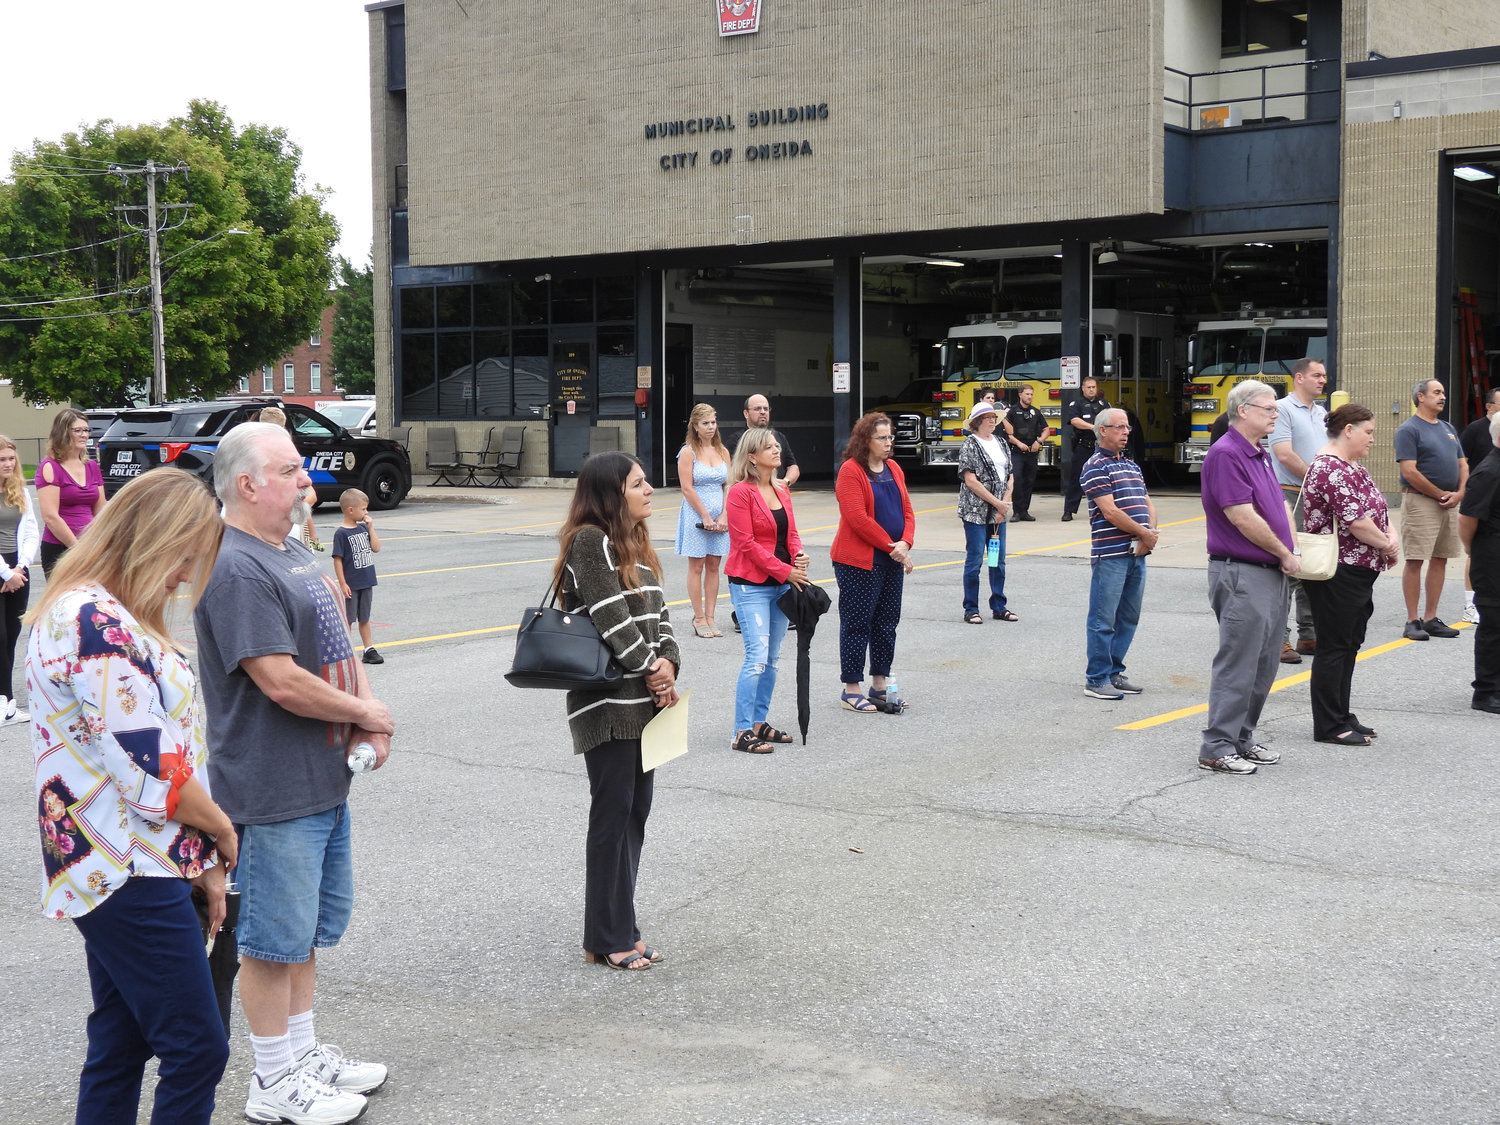 People gather for the city of Oneida's 9/11 Remembrance Ceremony on Sunday to pay homage to those that lost their lives that fateful day and never forget.